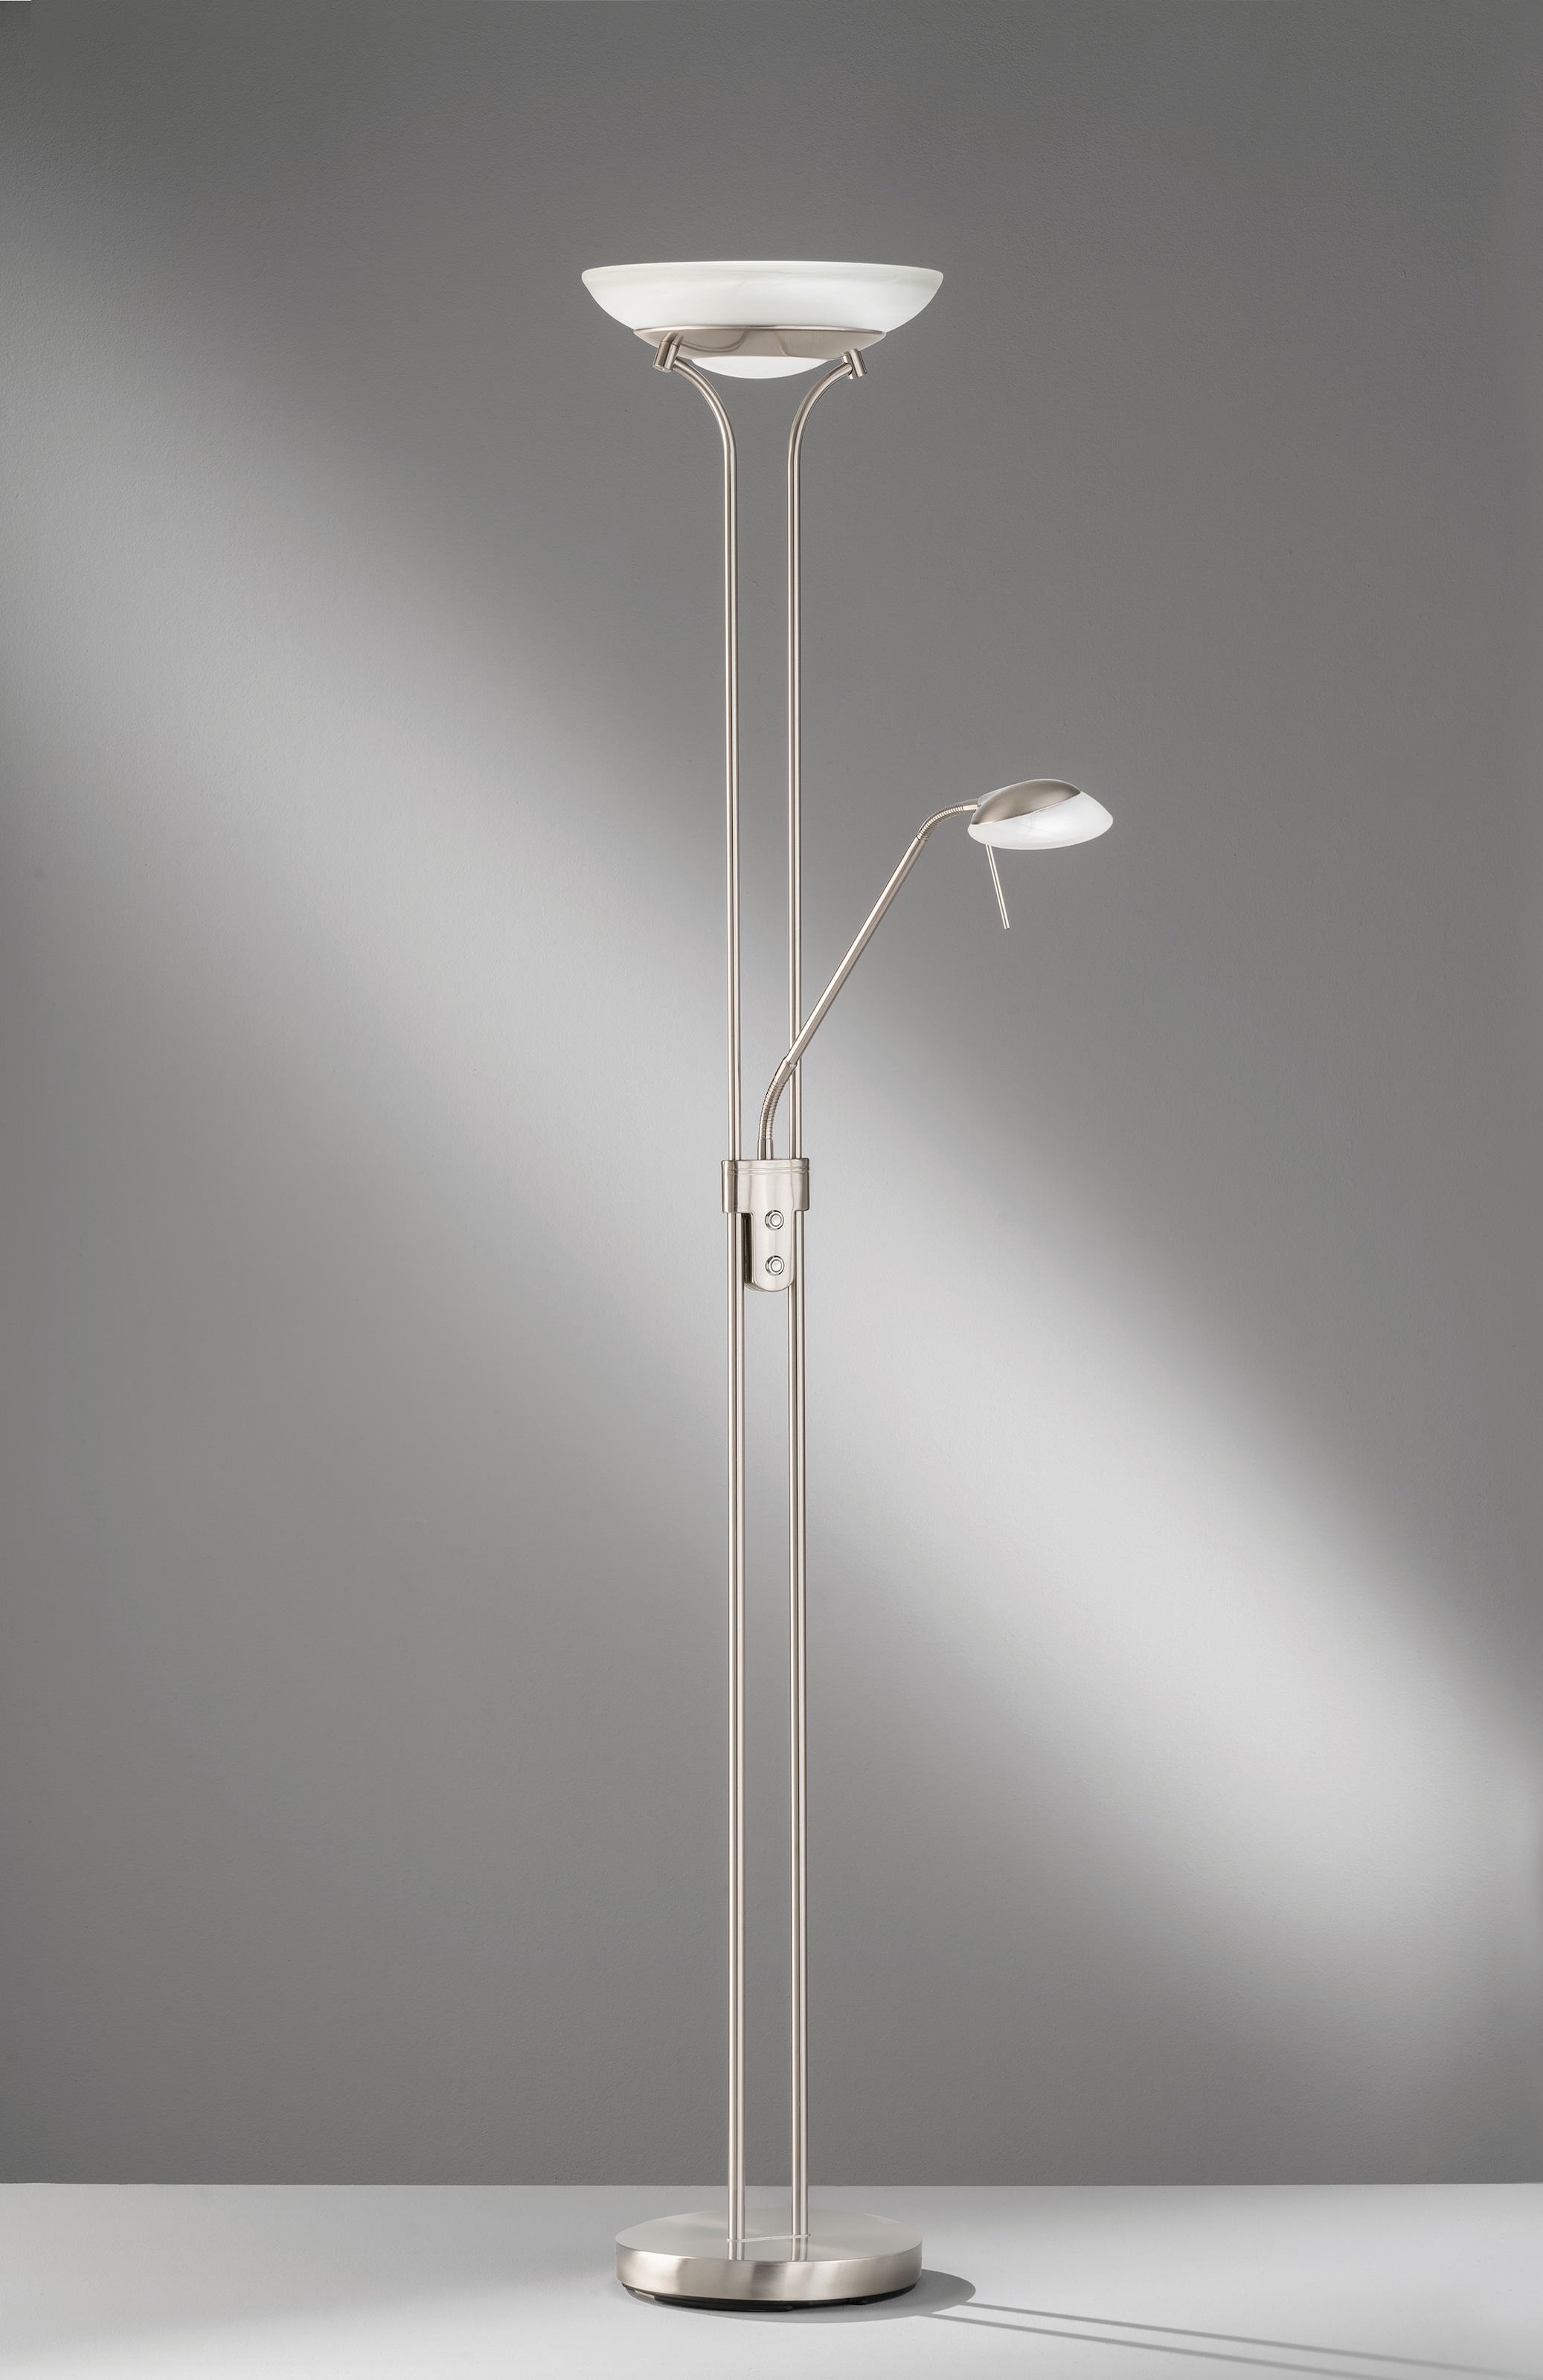 1 Stehlampe TW«, »Pool HONSEL LED flammig-flammig bei OTTO FISCHER &